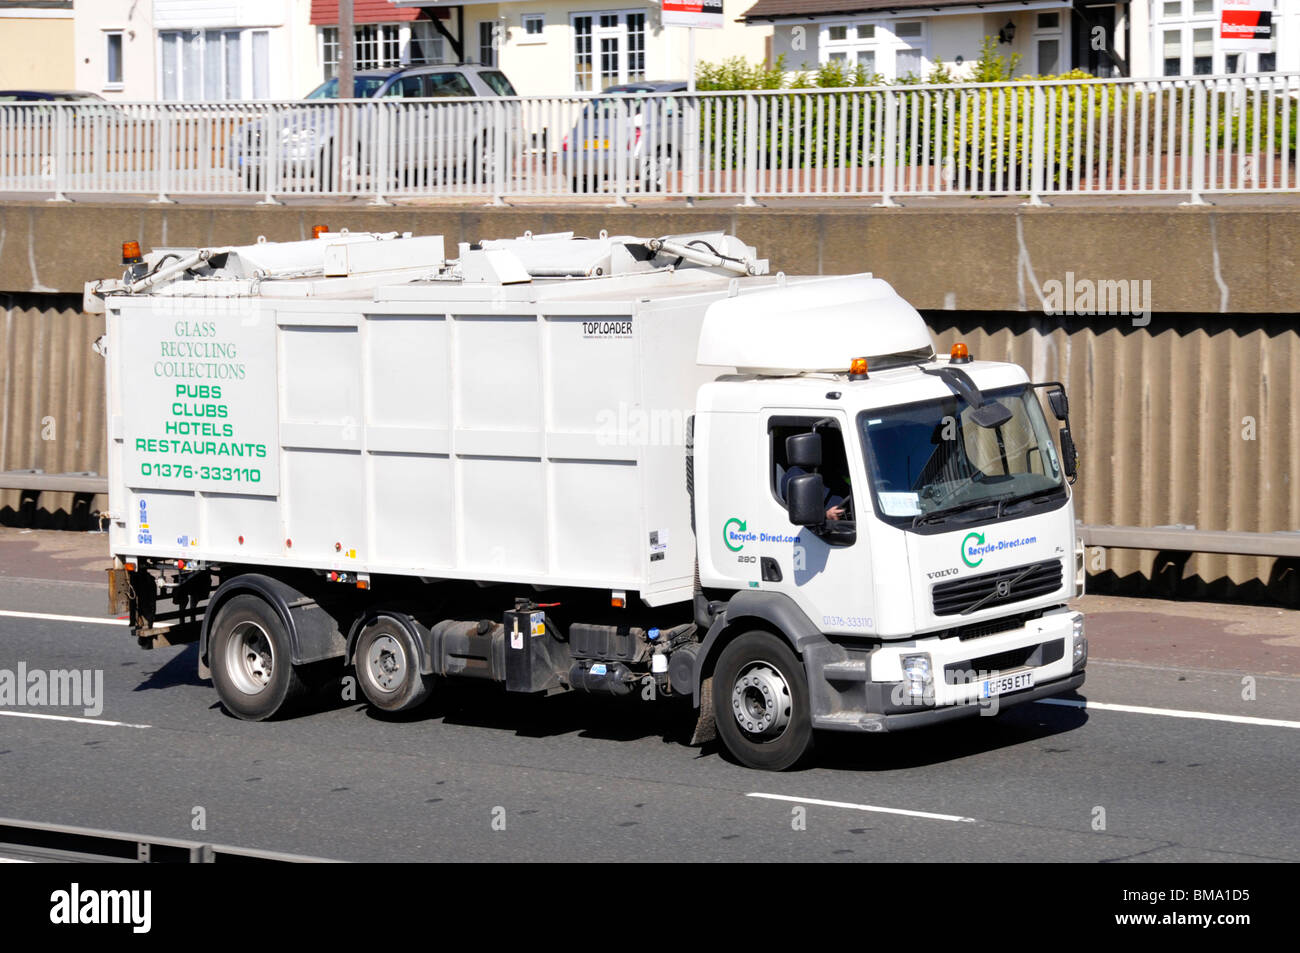 Recycling lorry for collecting glass from catering establishments Stock Photo